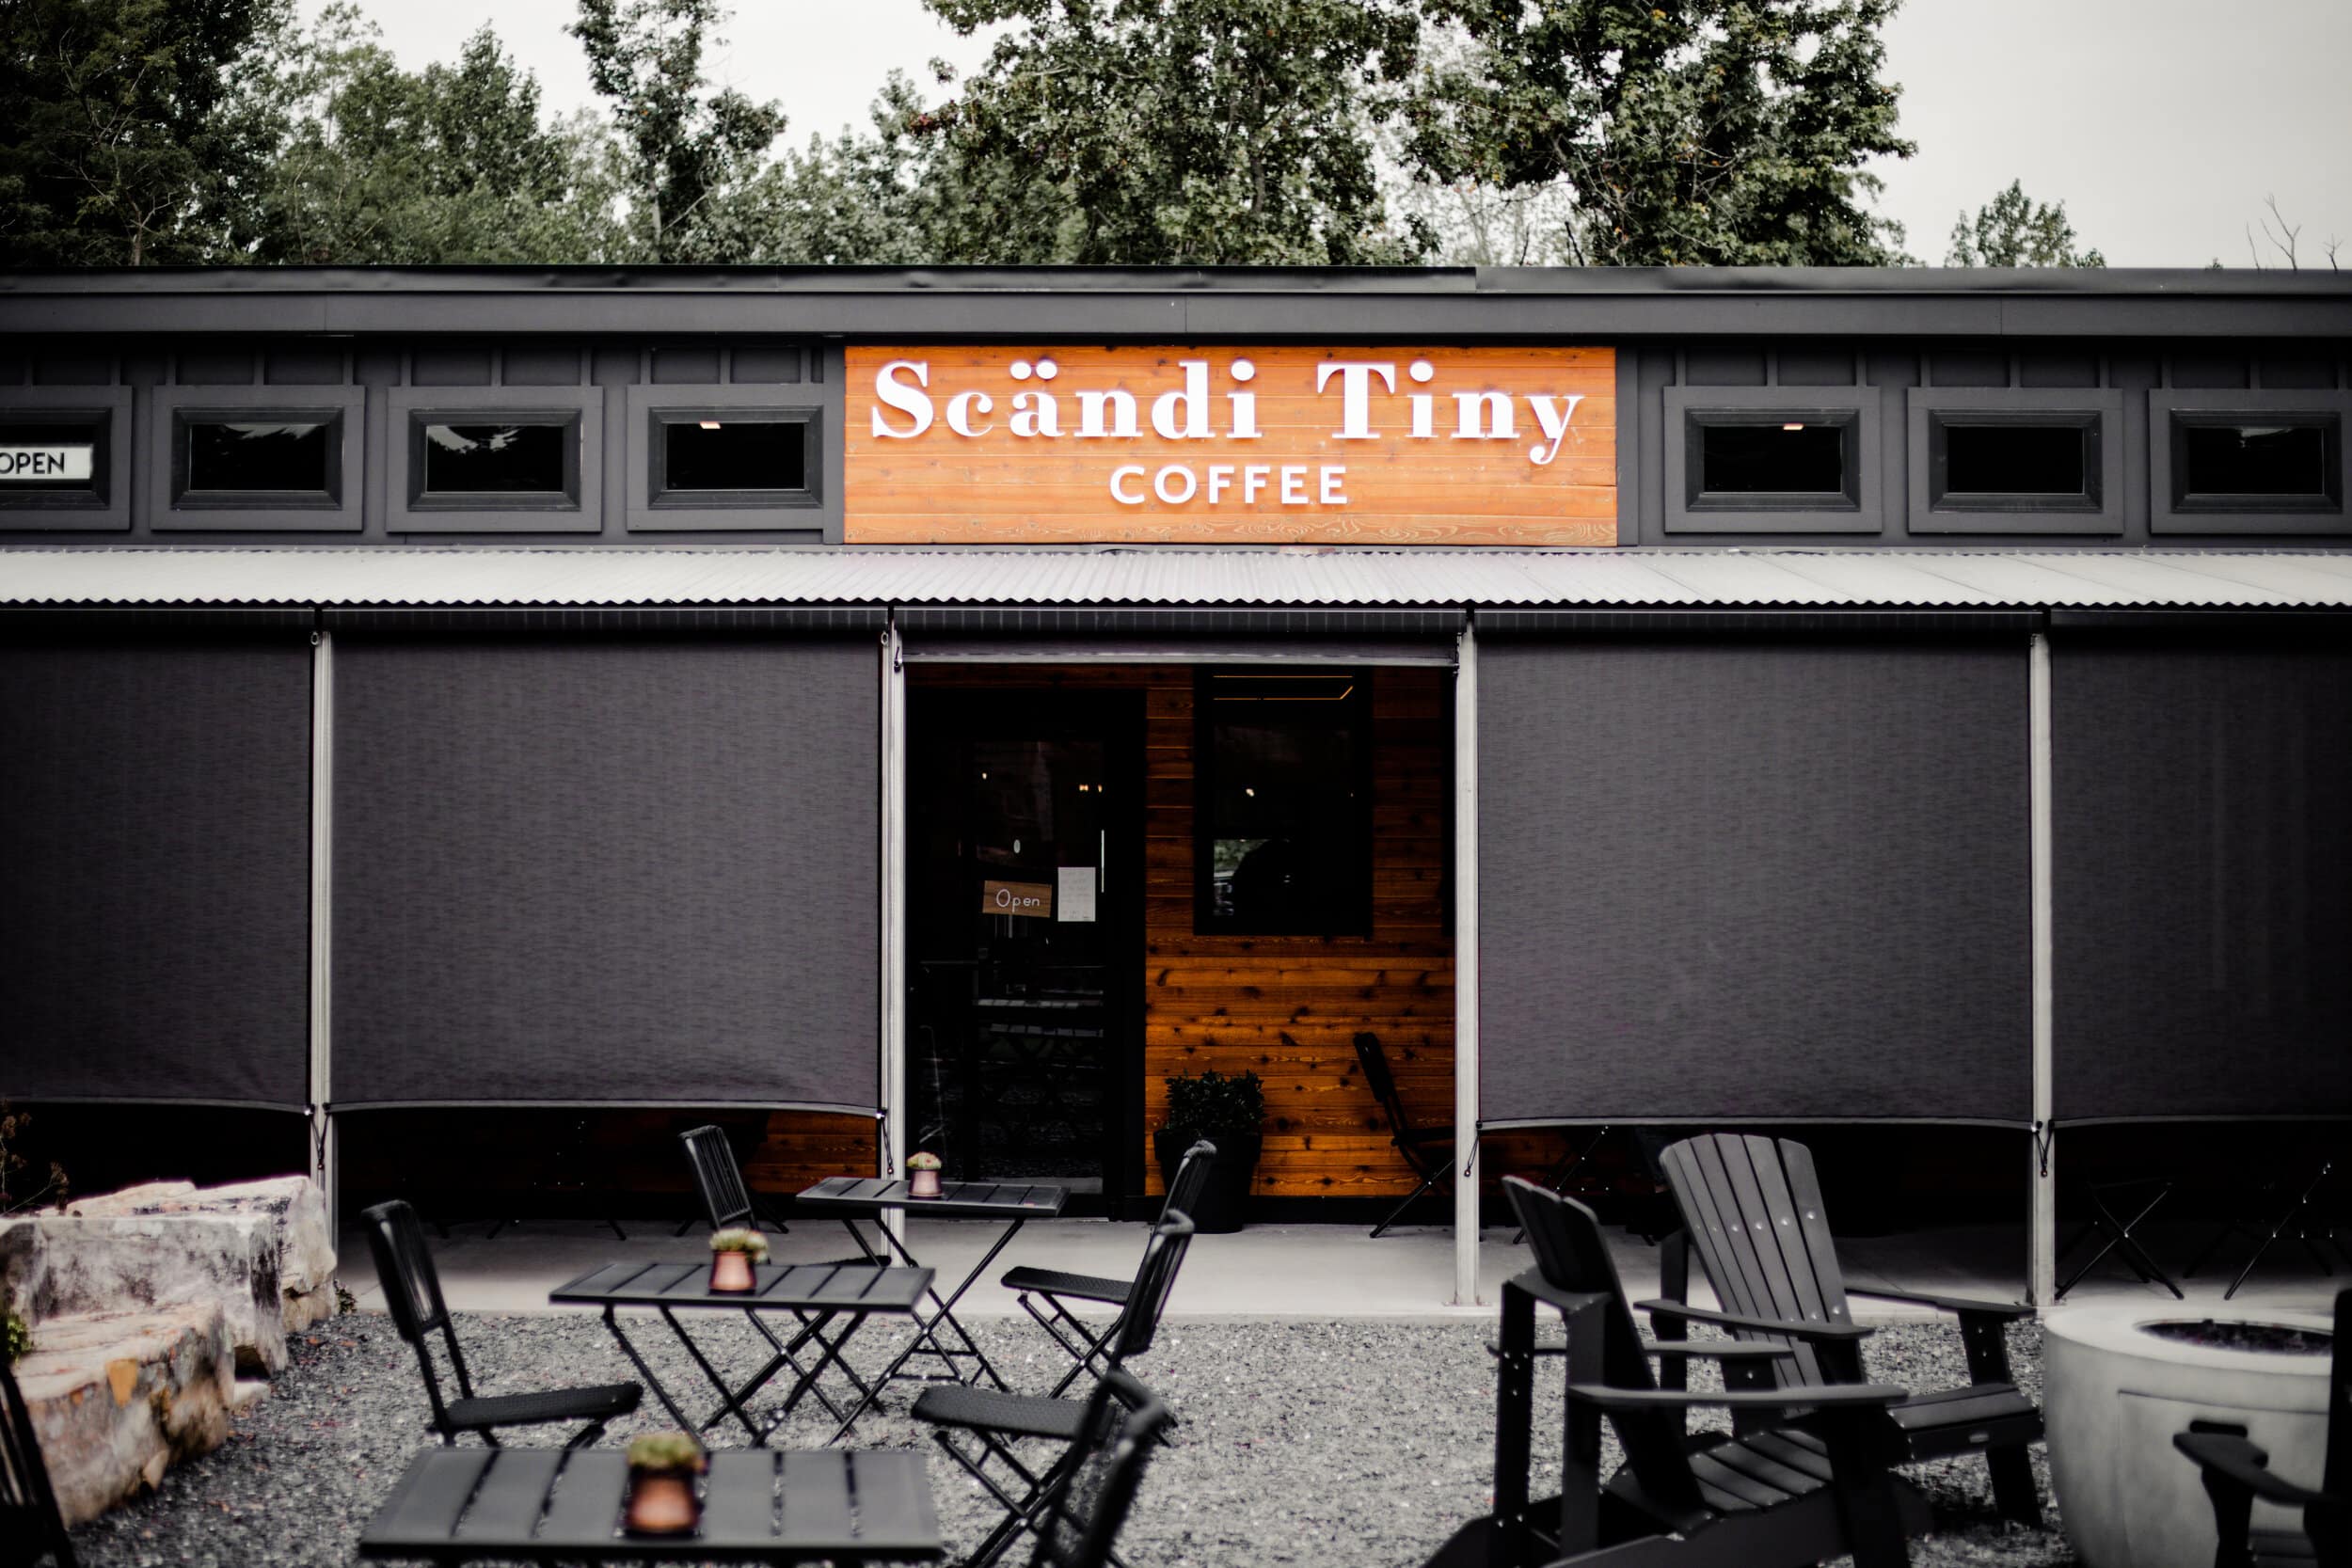 Scandi Tiny may be small, but their tasty drinks and cozy atmosphere will leave a big impact.